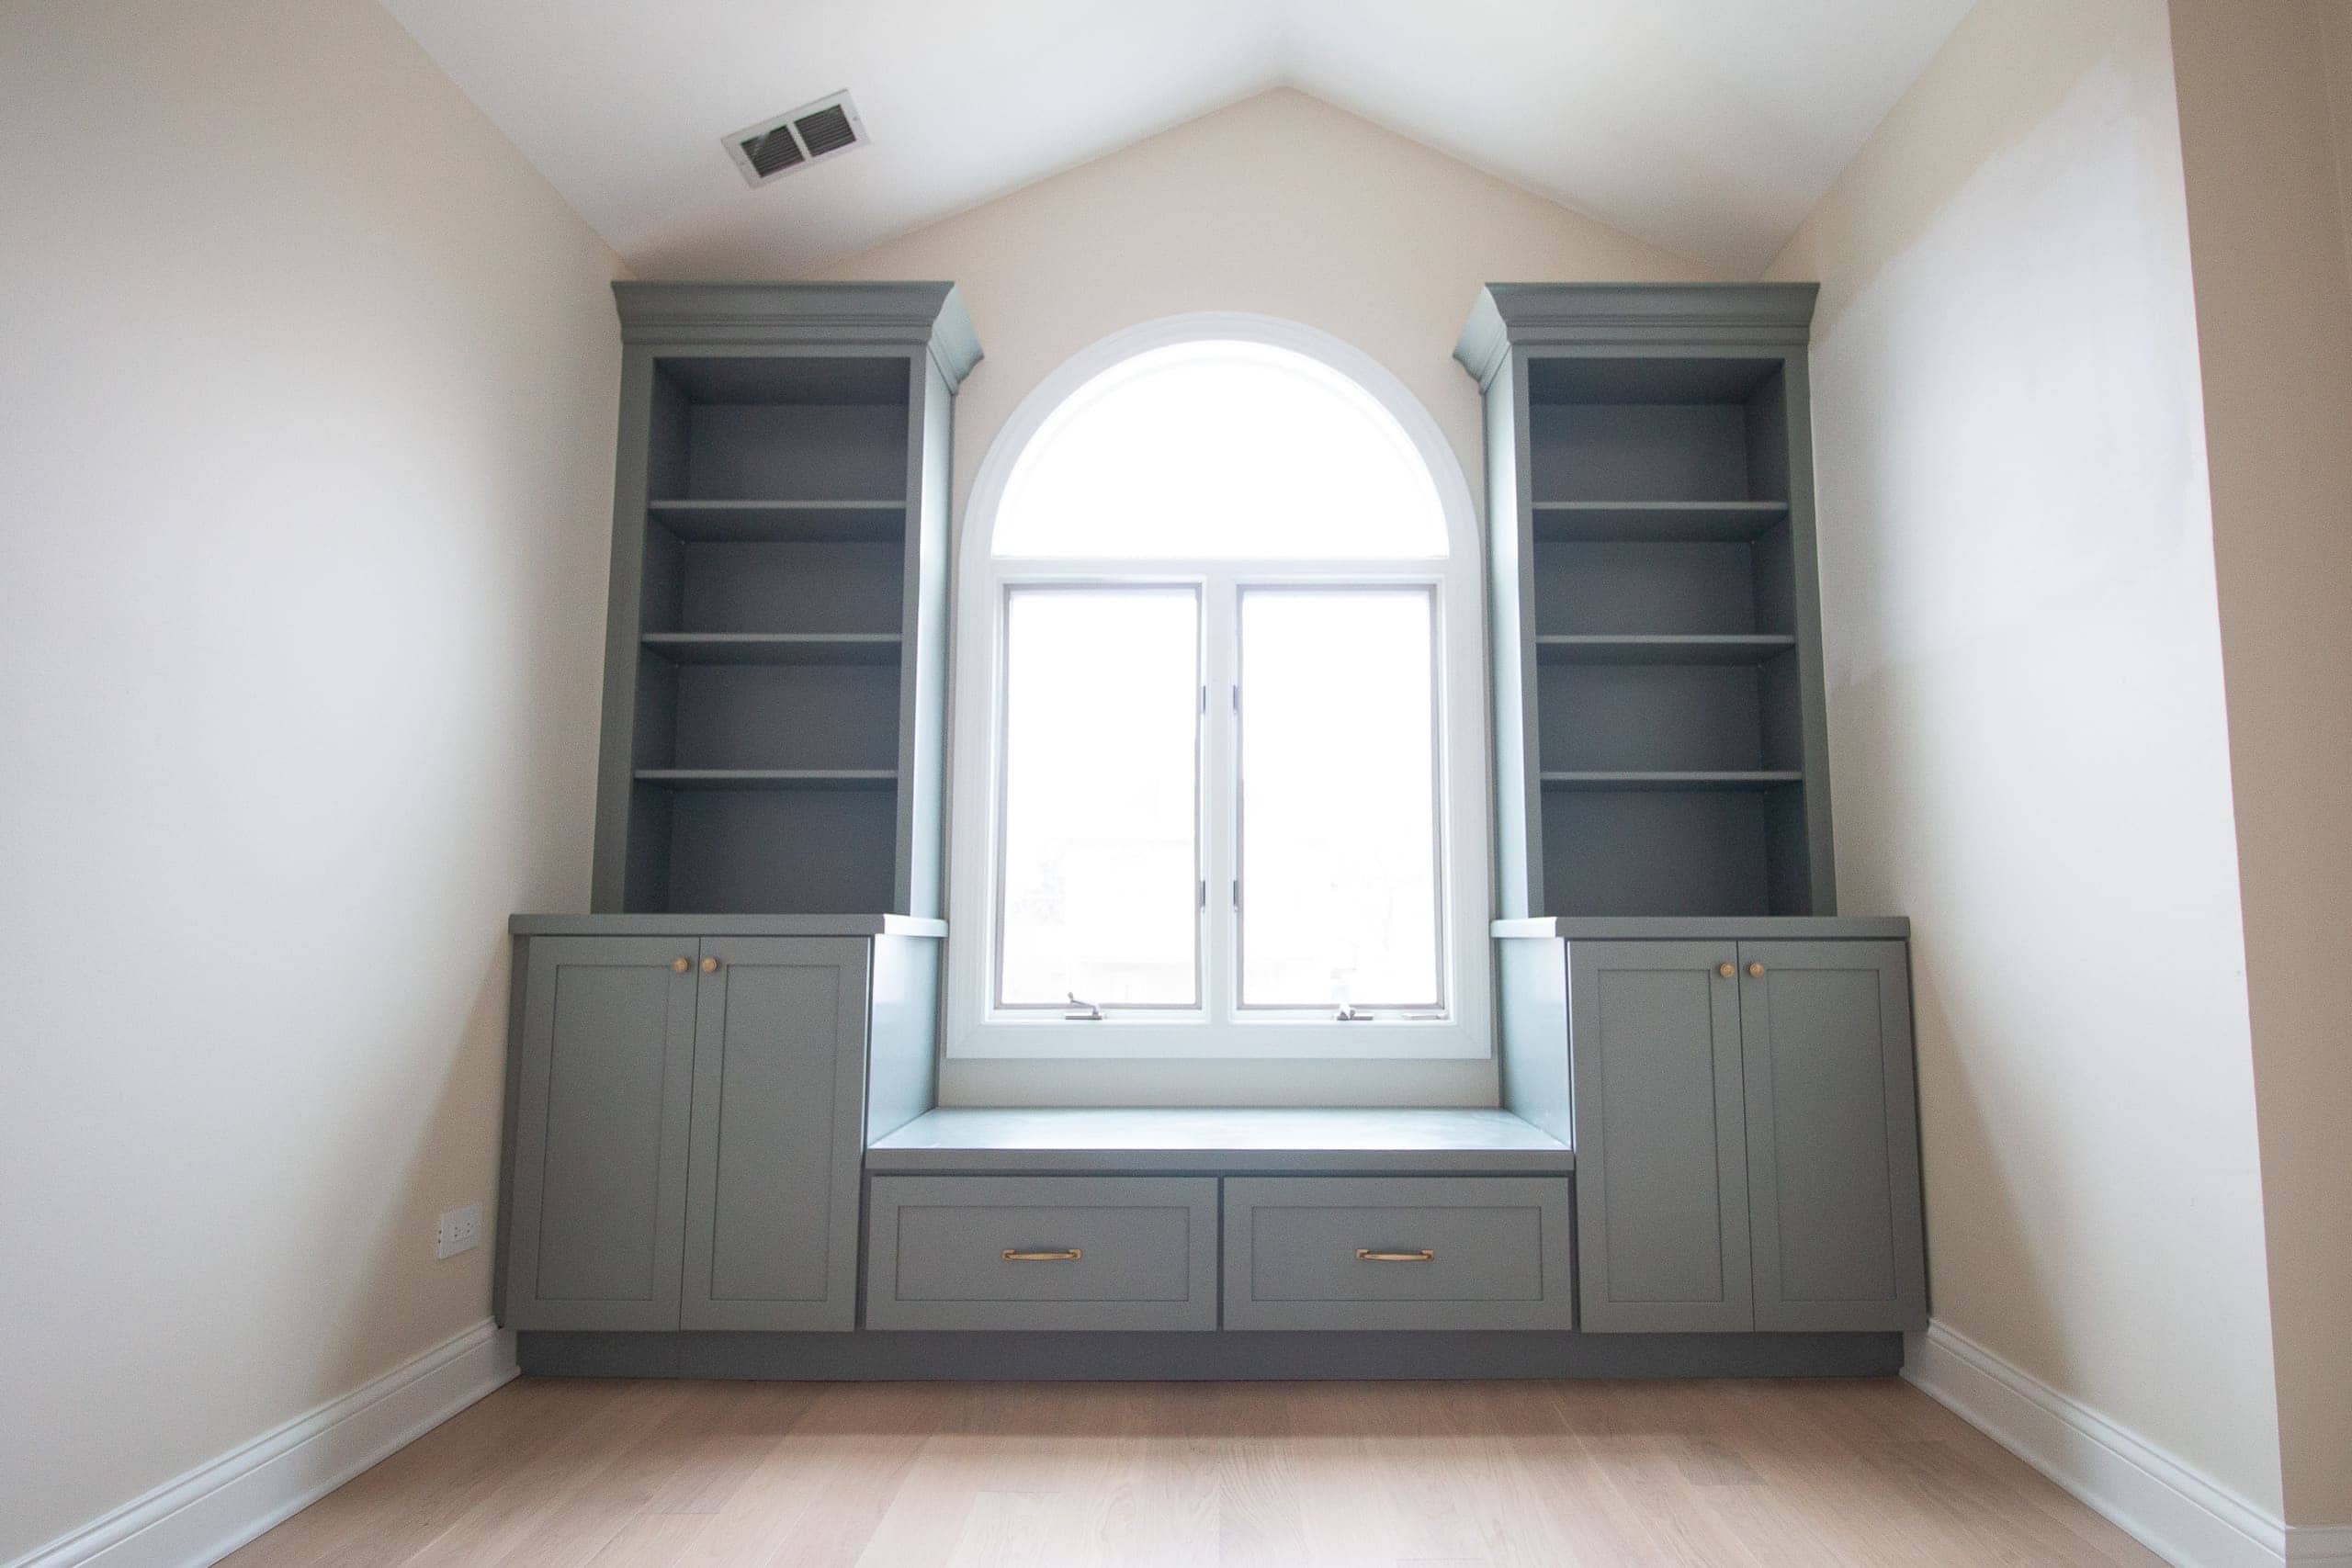 Our sage green nursery built-ins